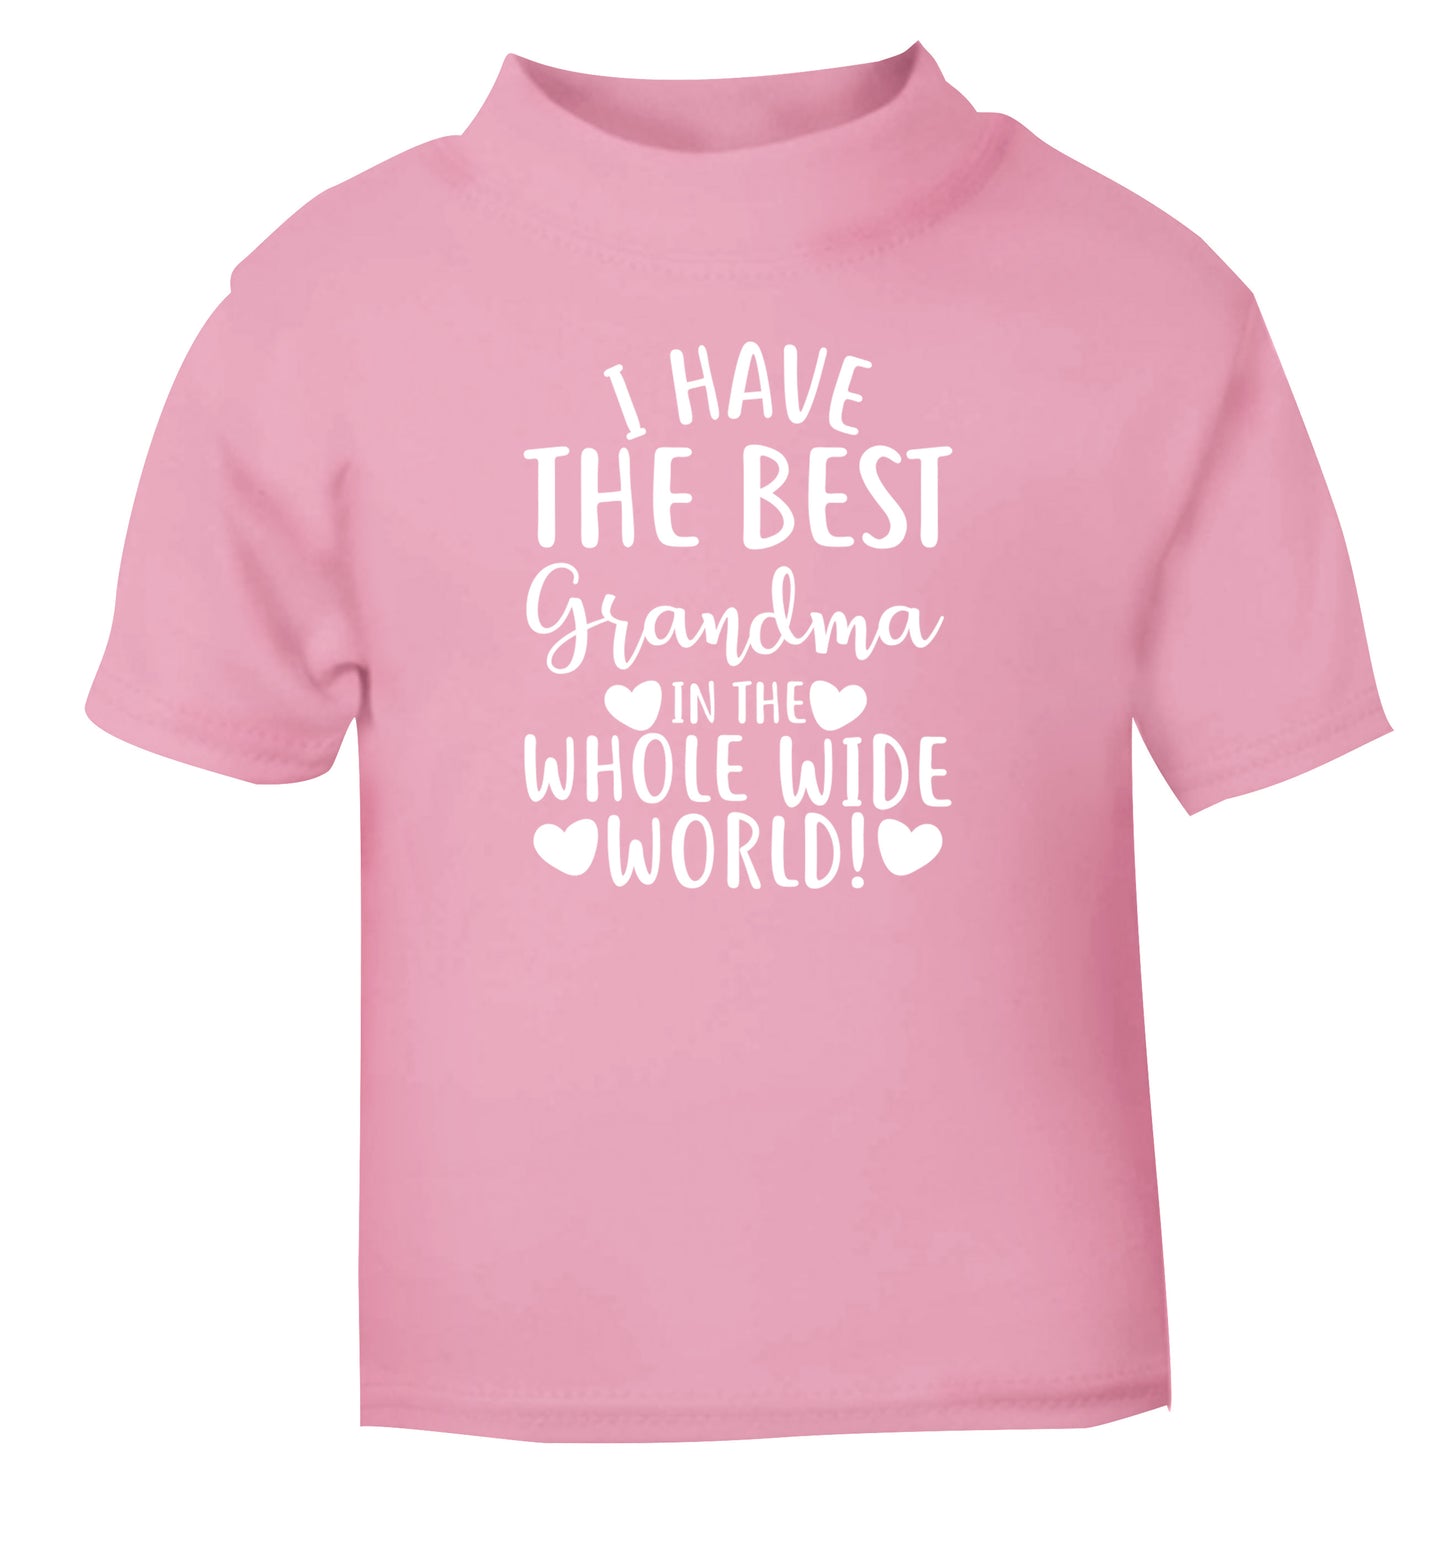 I have the best grandma in the whole wide world! light pink Baby Toddler Tshirt 2 Years